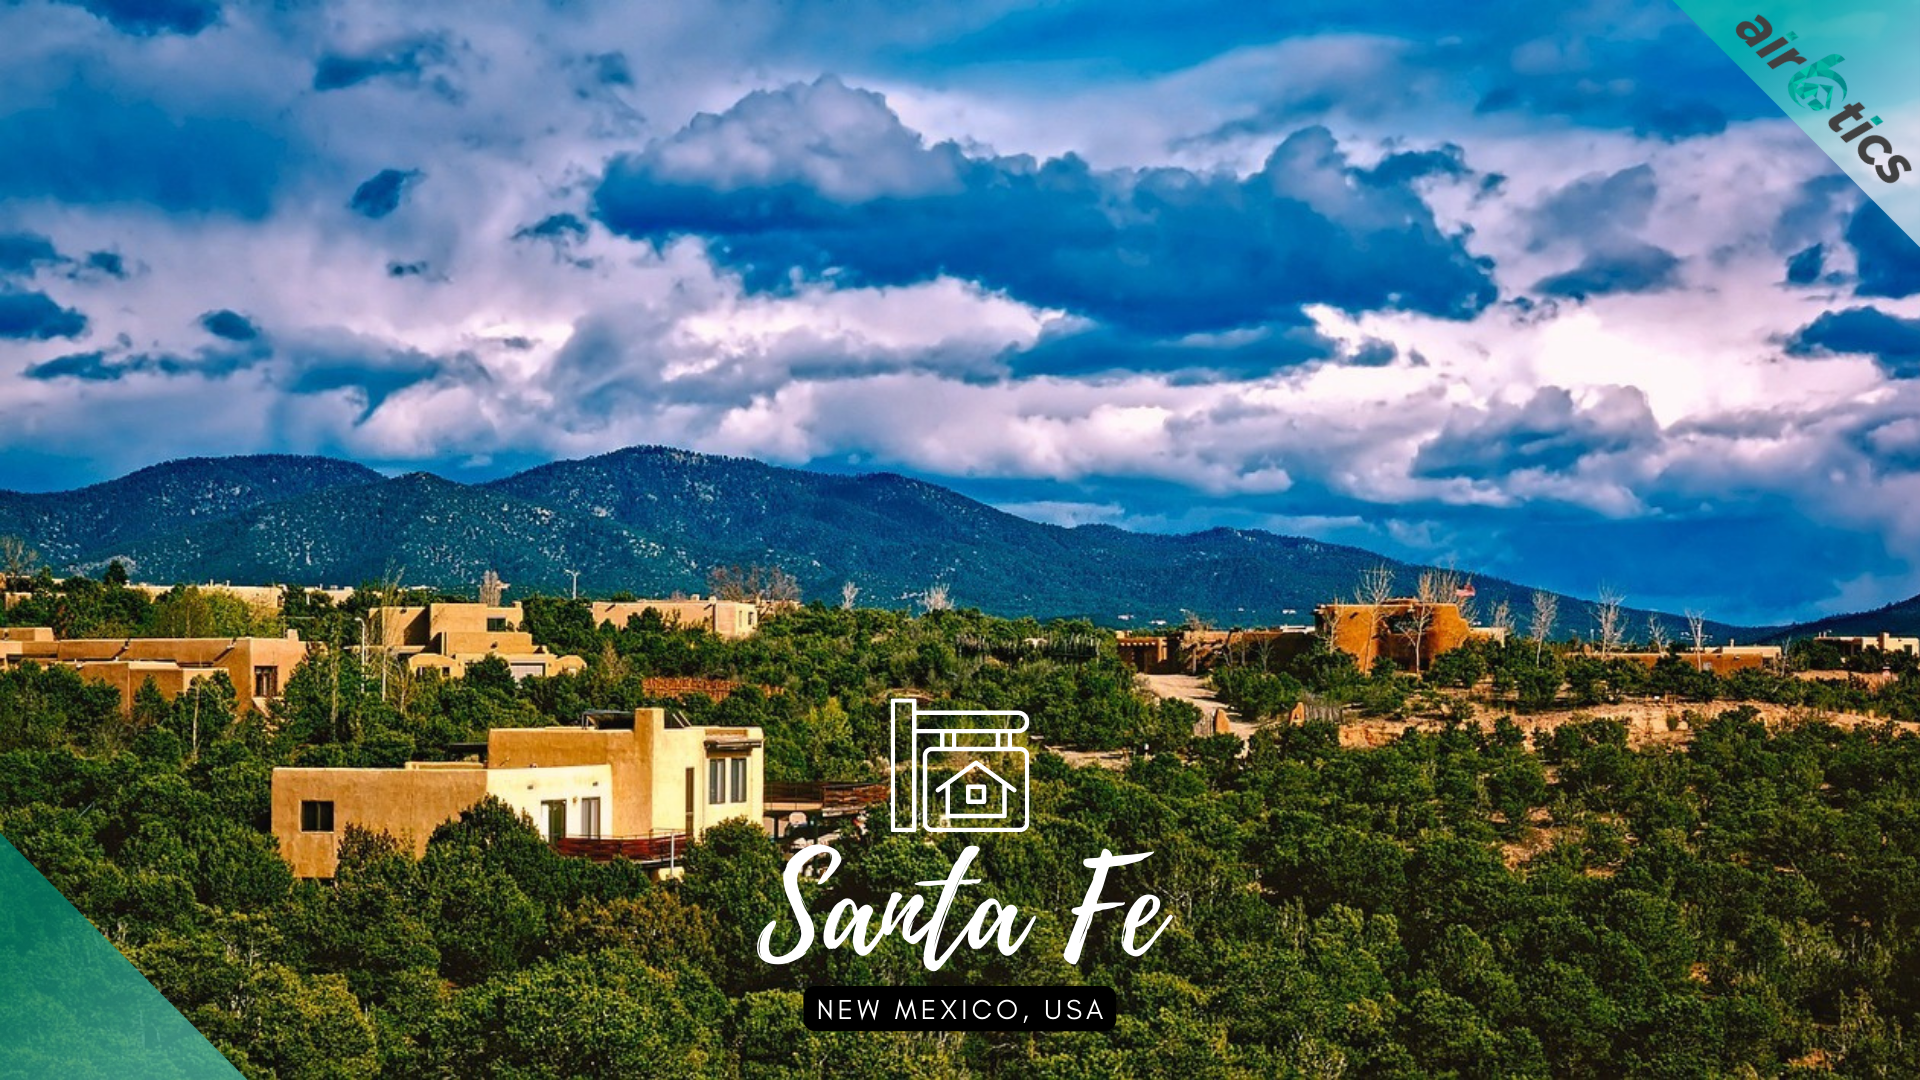 airbnb property investment Santa Fe